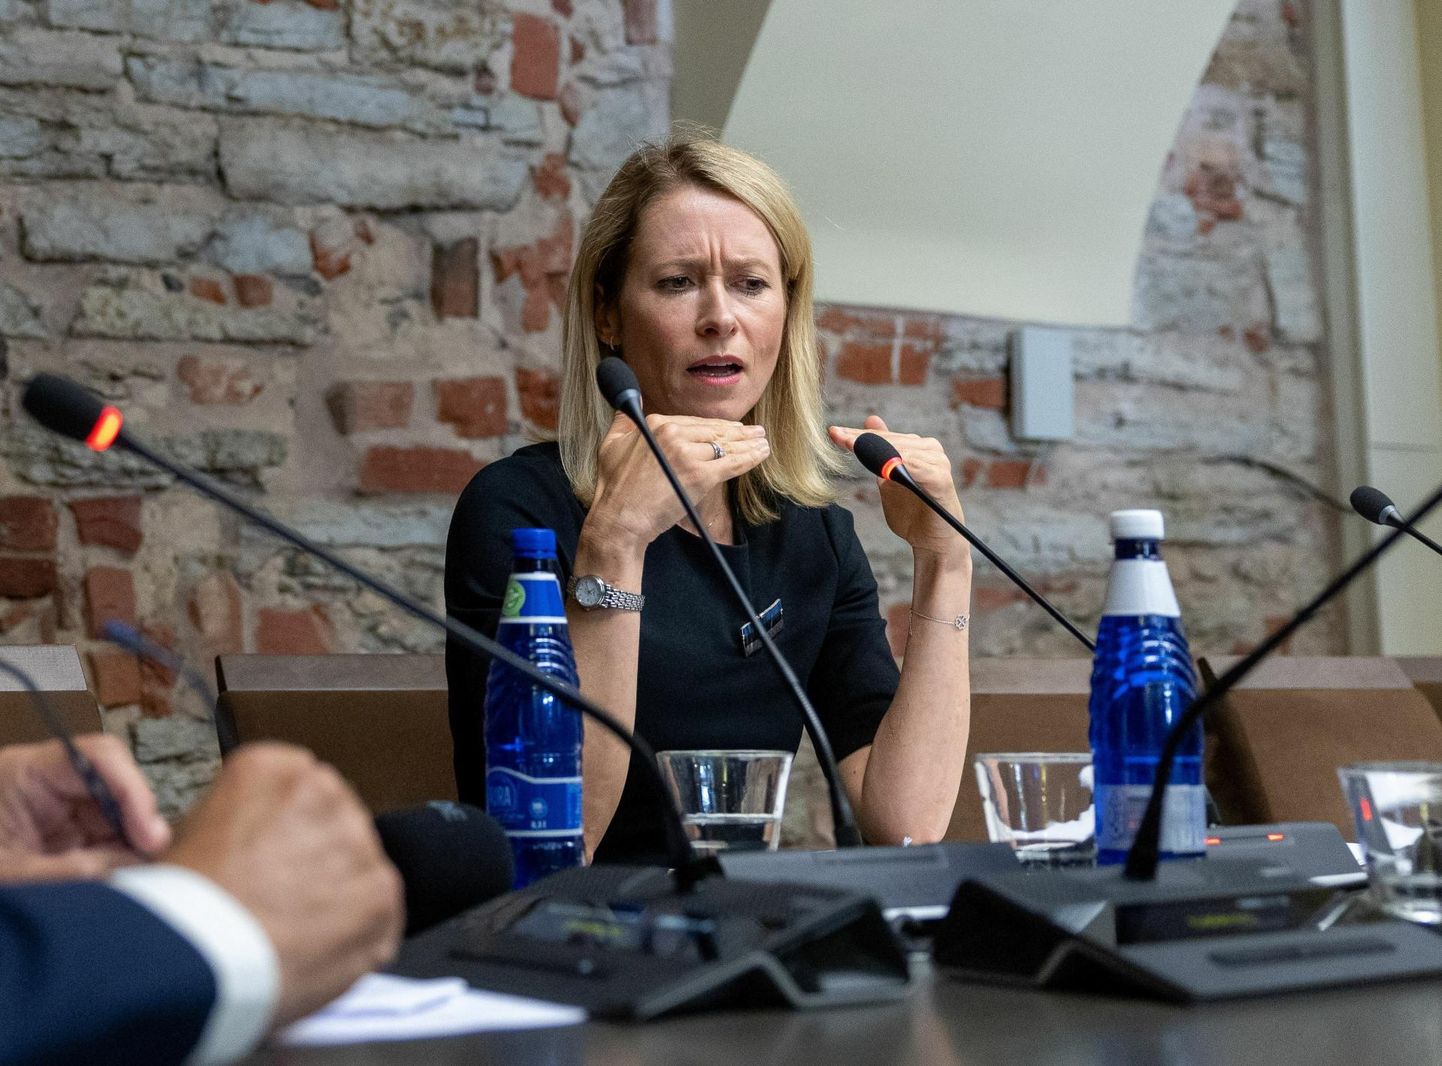 Estonia's major dailies say in their Tuesday editorials that Prime Minister Kaja Kallas once again missed the opportunity to give convincing and exhaustive answers to the public.